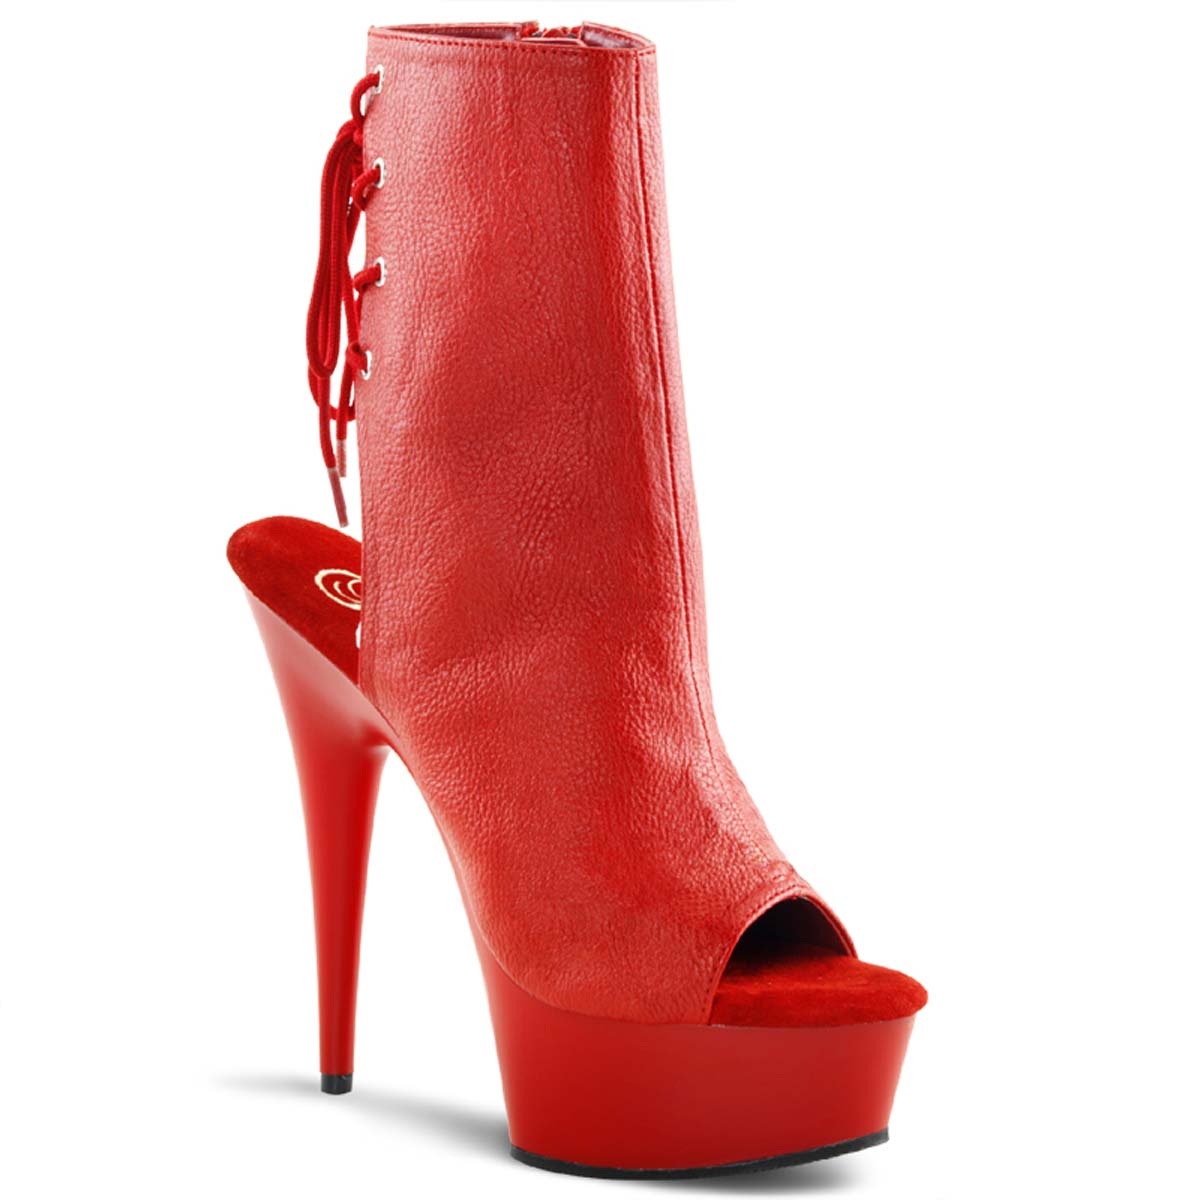 Pleaser Delight-1018 - Red Pu/Red in Sexy Boots - $81.95